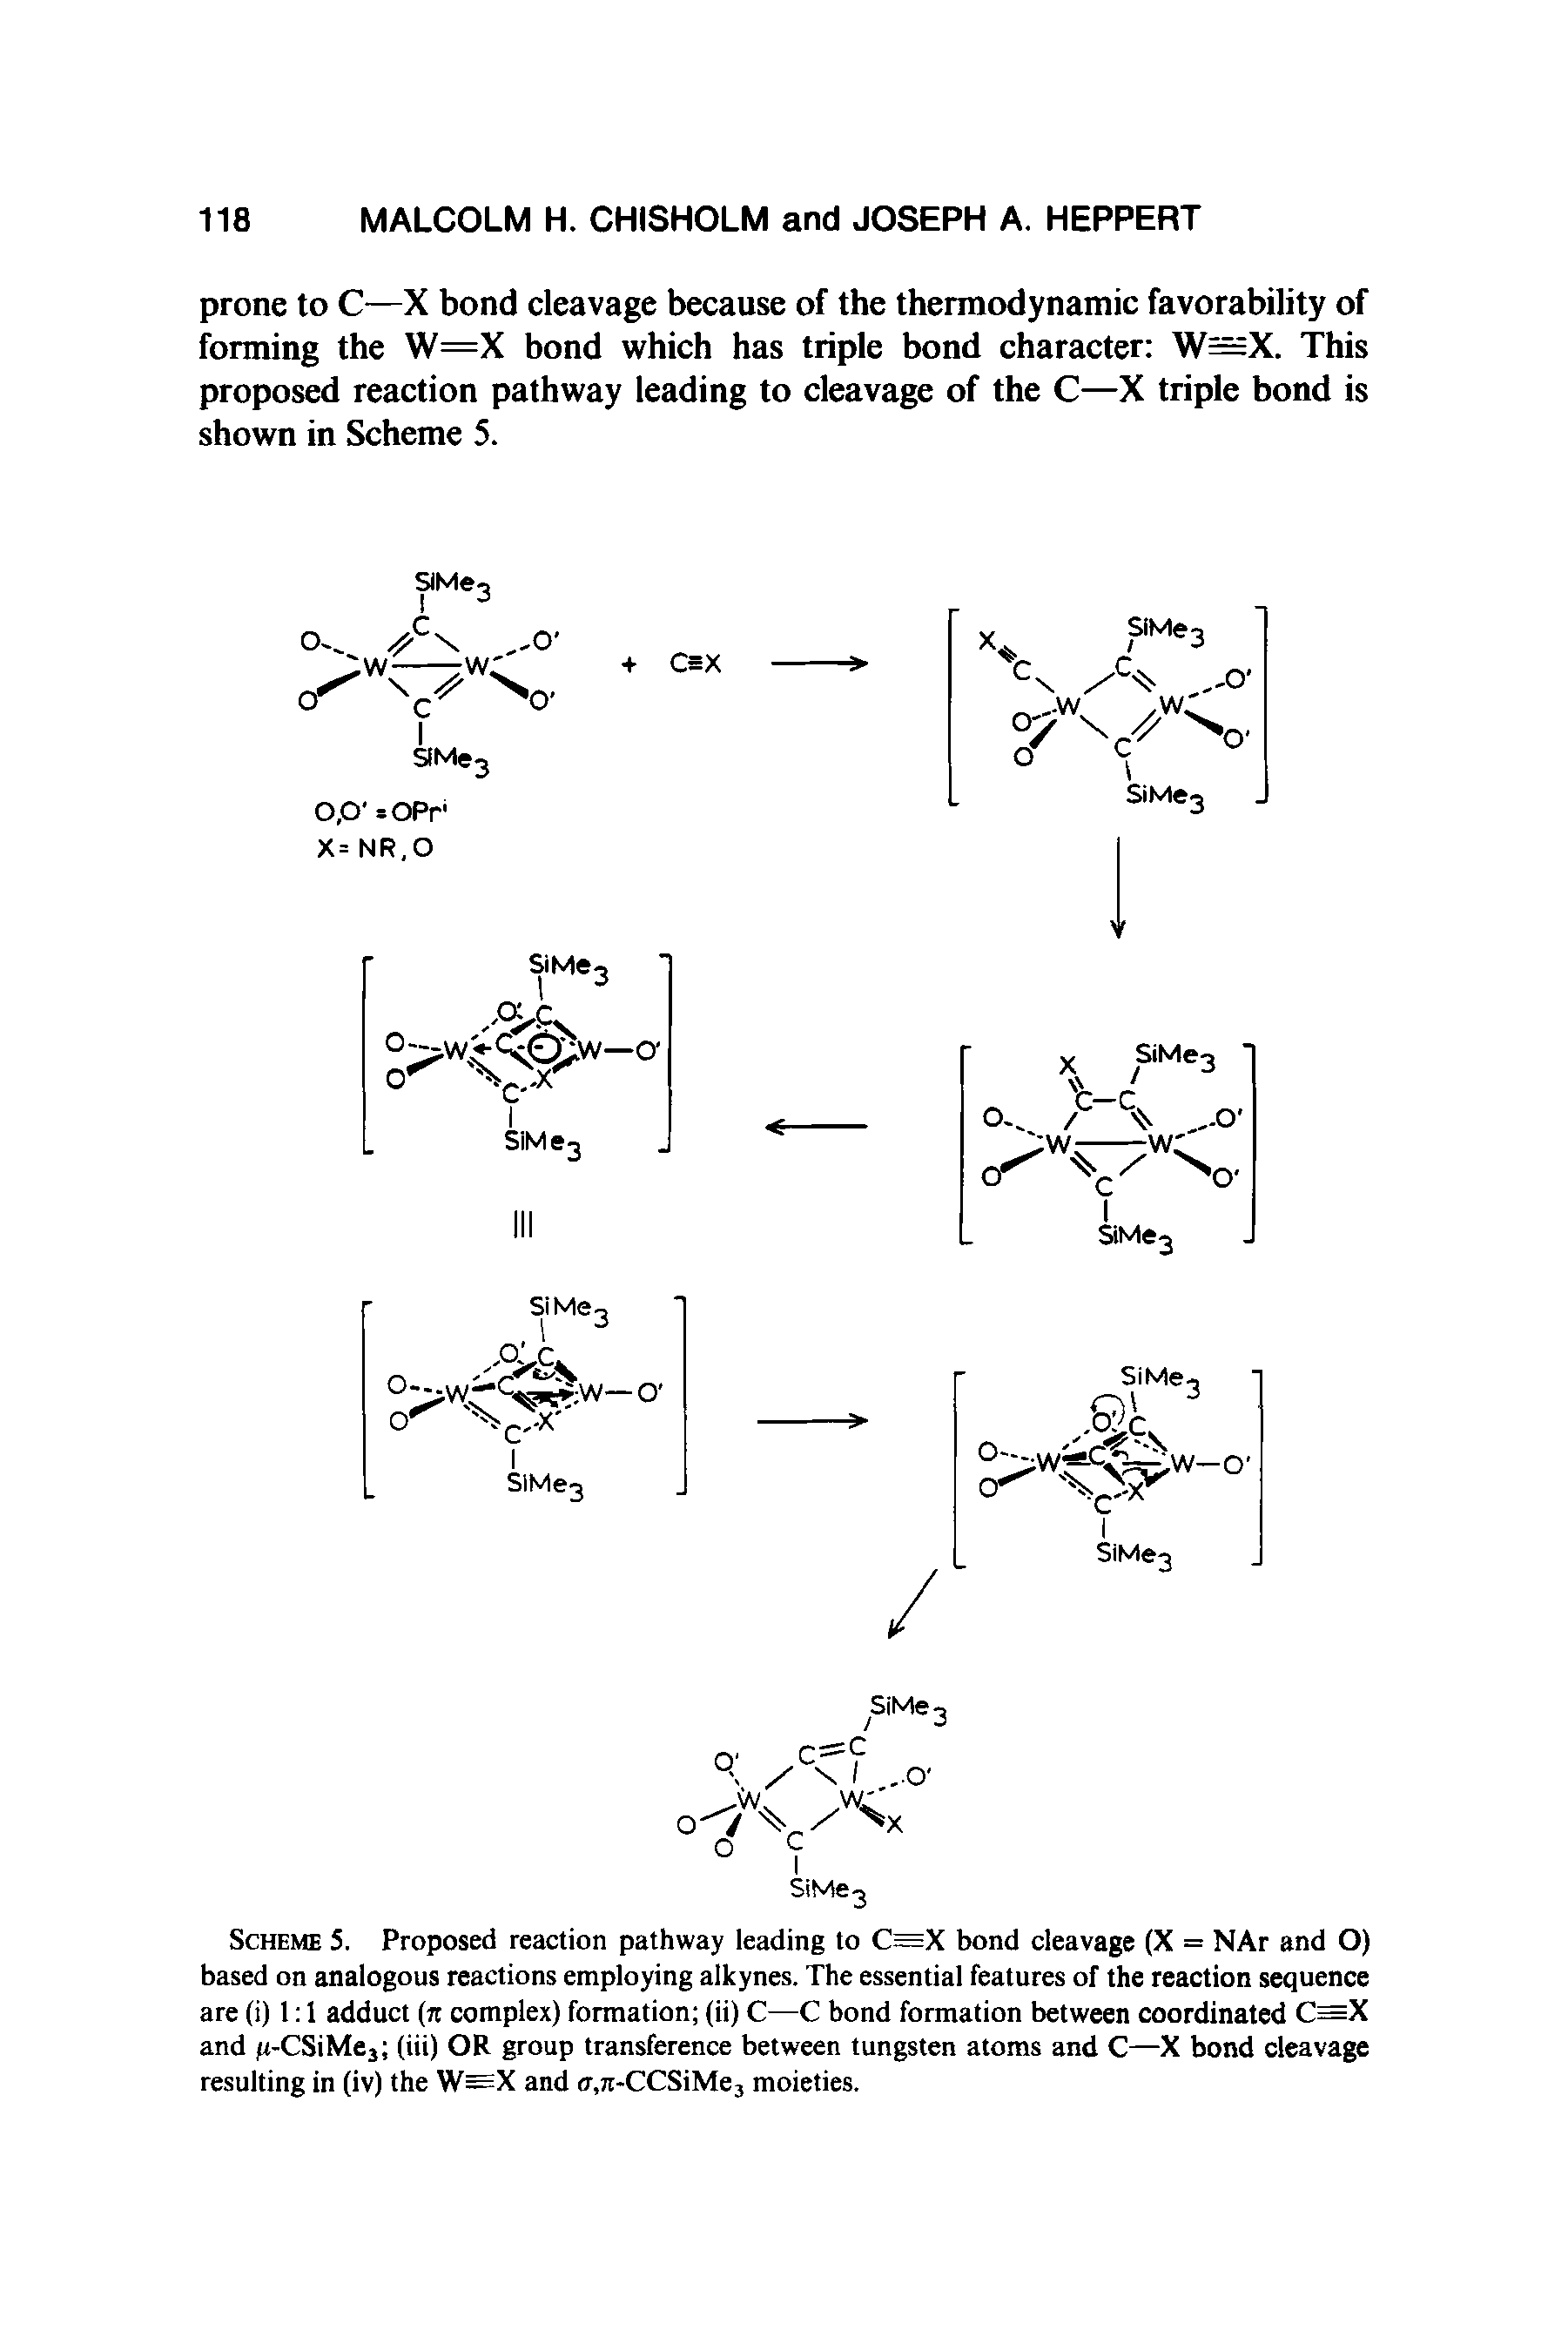 Scheme 5. Proposed reaction pathway leading to C=X bond cleavage (X = NAr and O) based on analogous reactions employing alkynes. The essential features of the reaction sequence are (i) 1 1 adduct (n complex) formation (ii) C—C bond formation between coordinated C=X and u-CSiMe3 (iii) OR group transference between tungsten atoms and C—X bond cleavage resulting in (iv) the W=X and <r,7t-CCSiMe3 moieties.